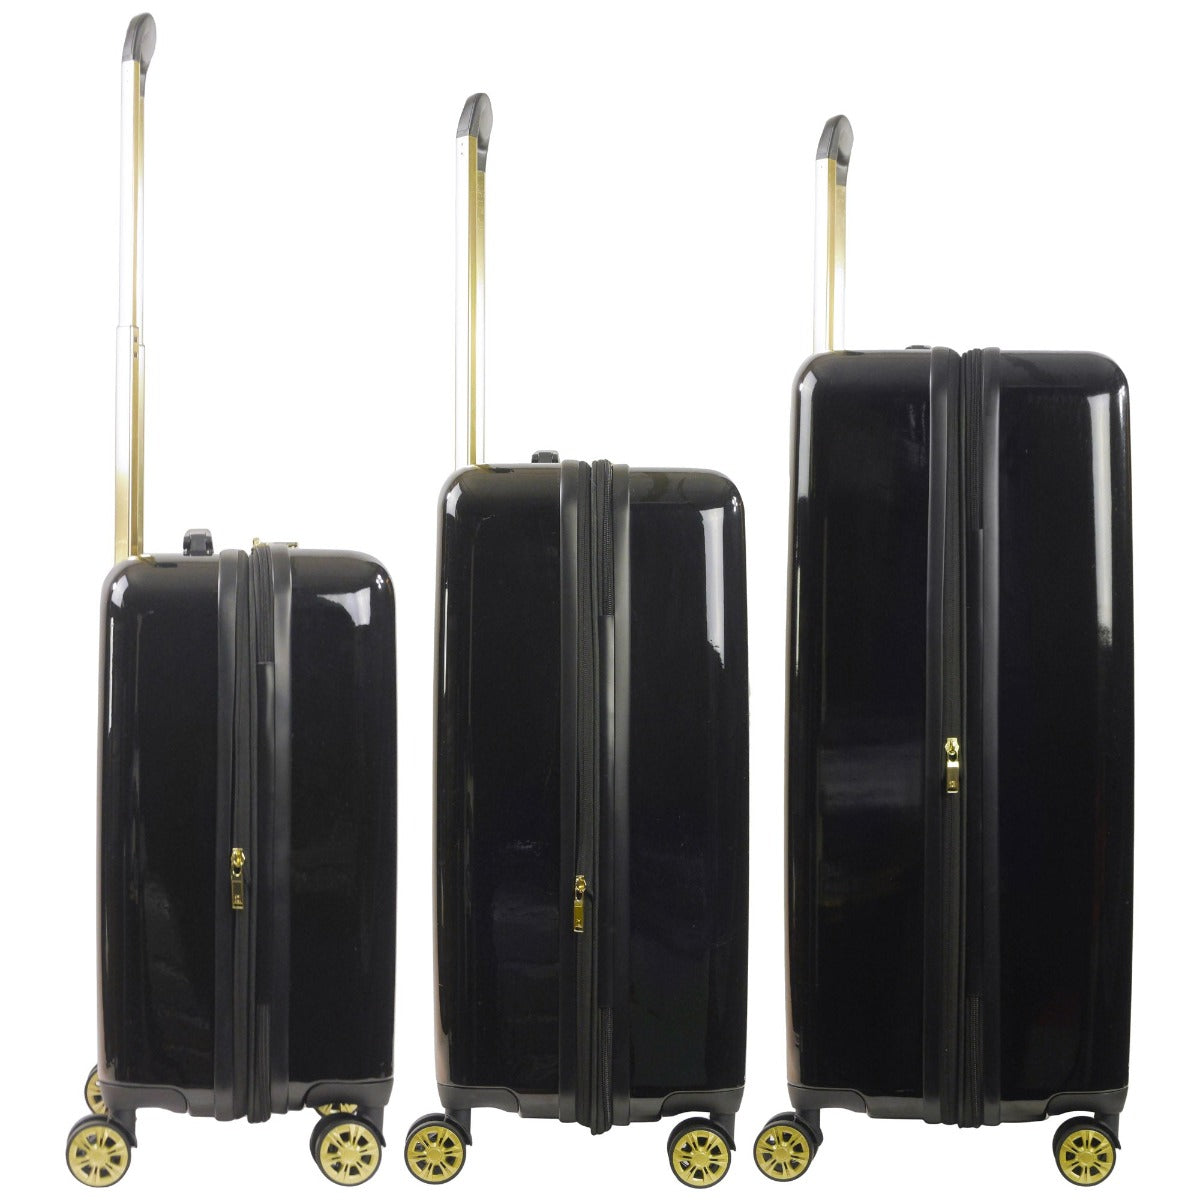 Ful Groove hardside spinner suitcase 3 Pc black luggage set 22 inch 27 inch 31 inch